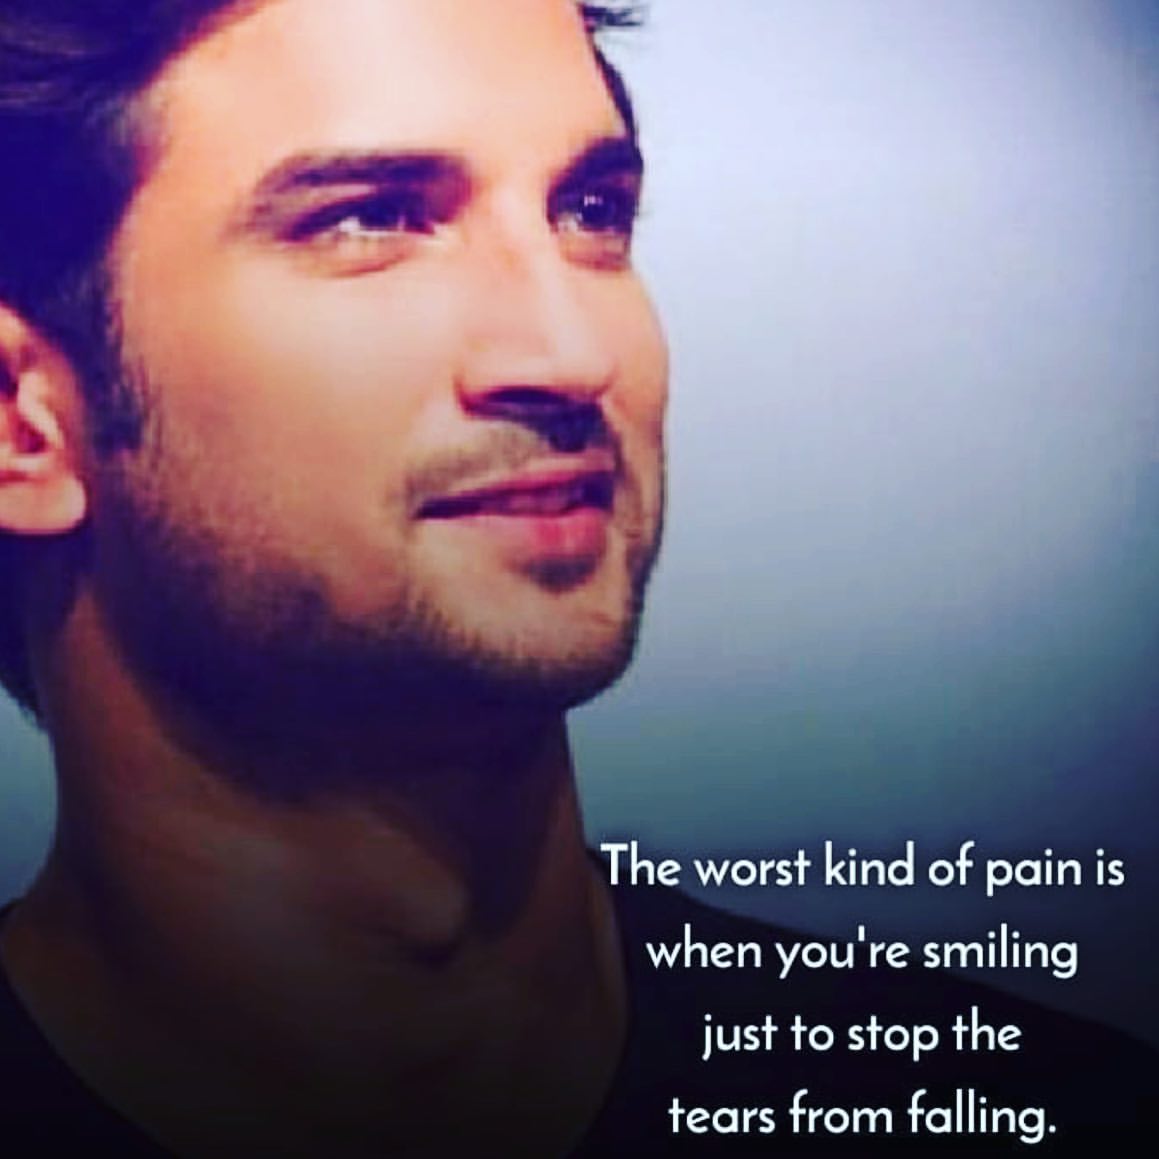 The worst kind of pain is when you're smiling just to stop the tears from falling.